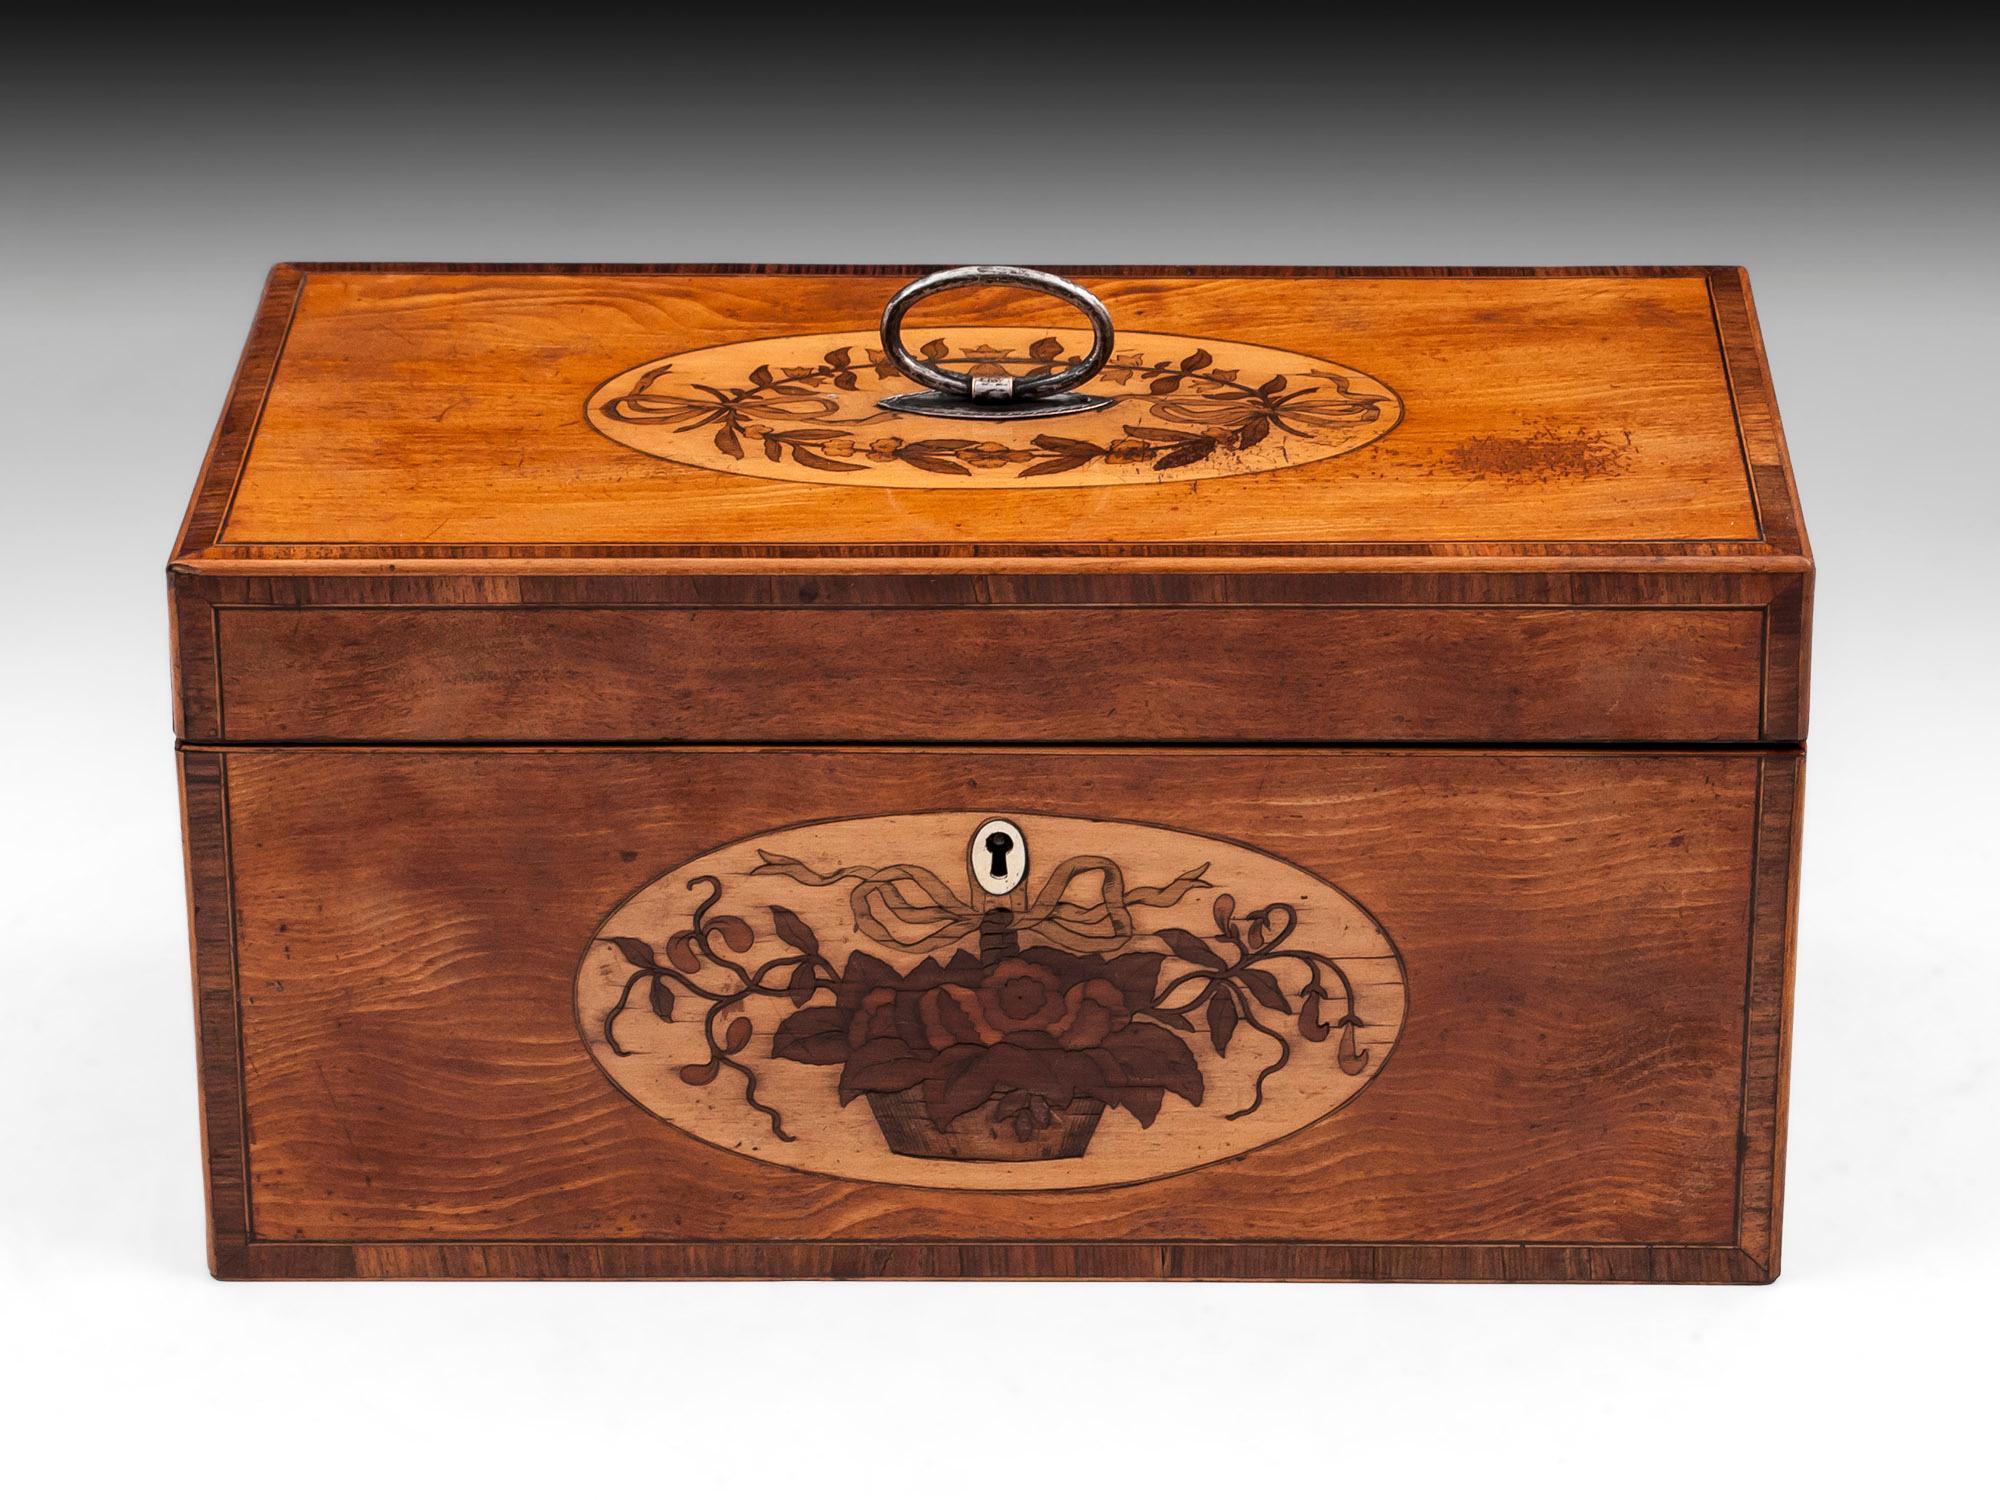 Antique satinwood tea chest with an oval inlay to the front depicting a floral basket with a bone escutcheon. The top has an oval floral inlay framing the engraved silver plated handle. The edge is crossbanded with a kingwood and boxwood banding.